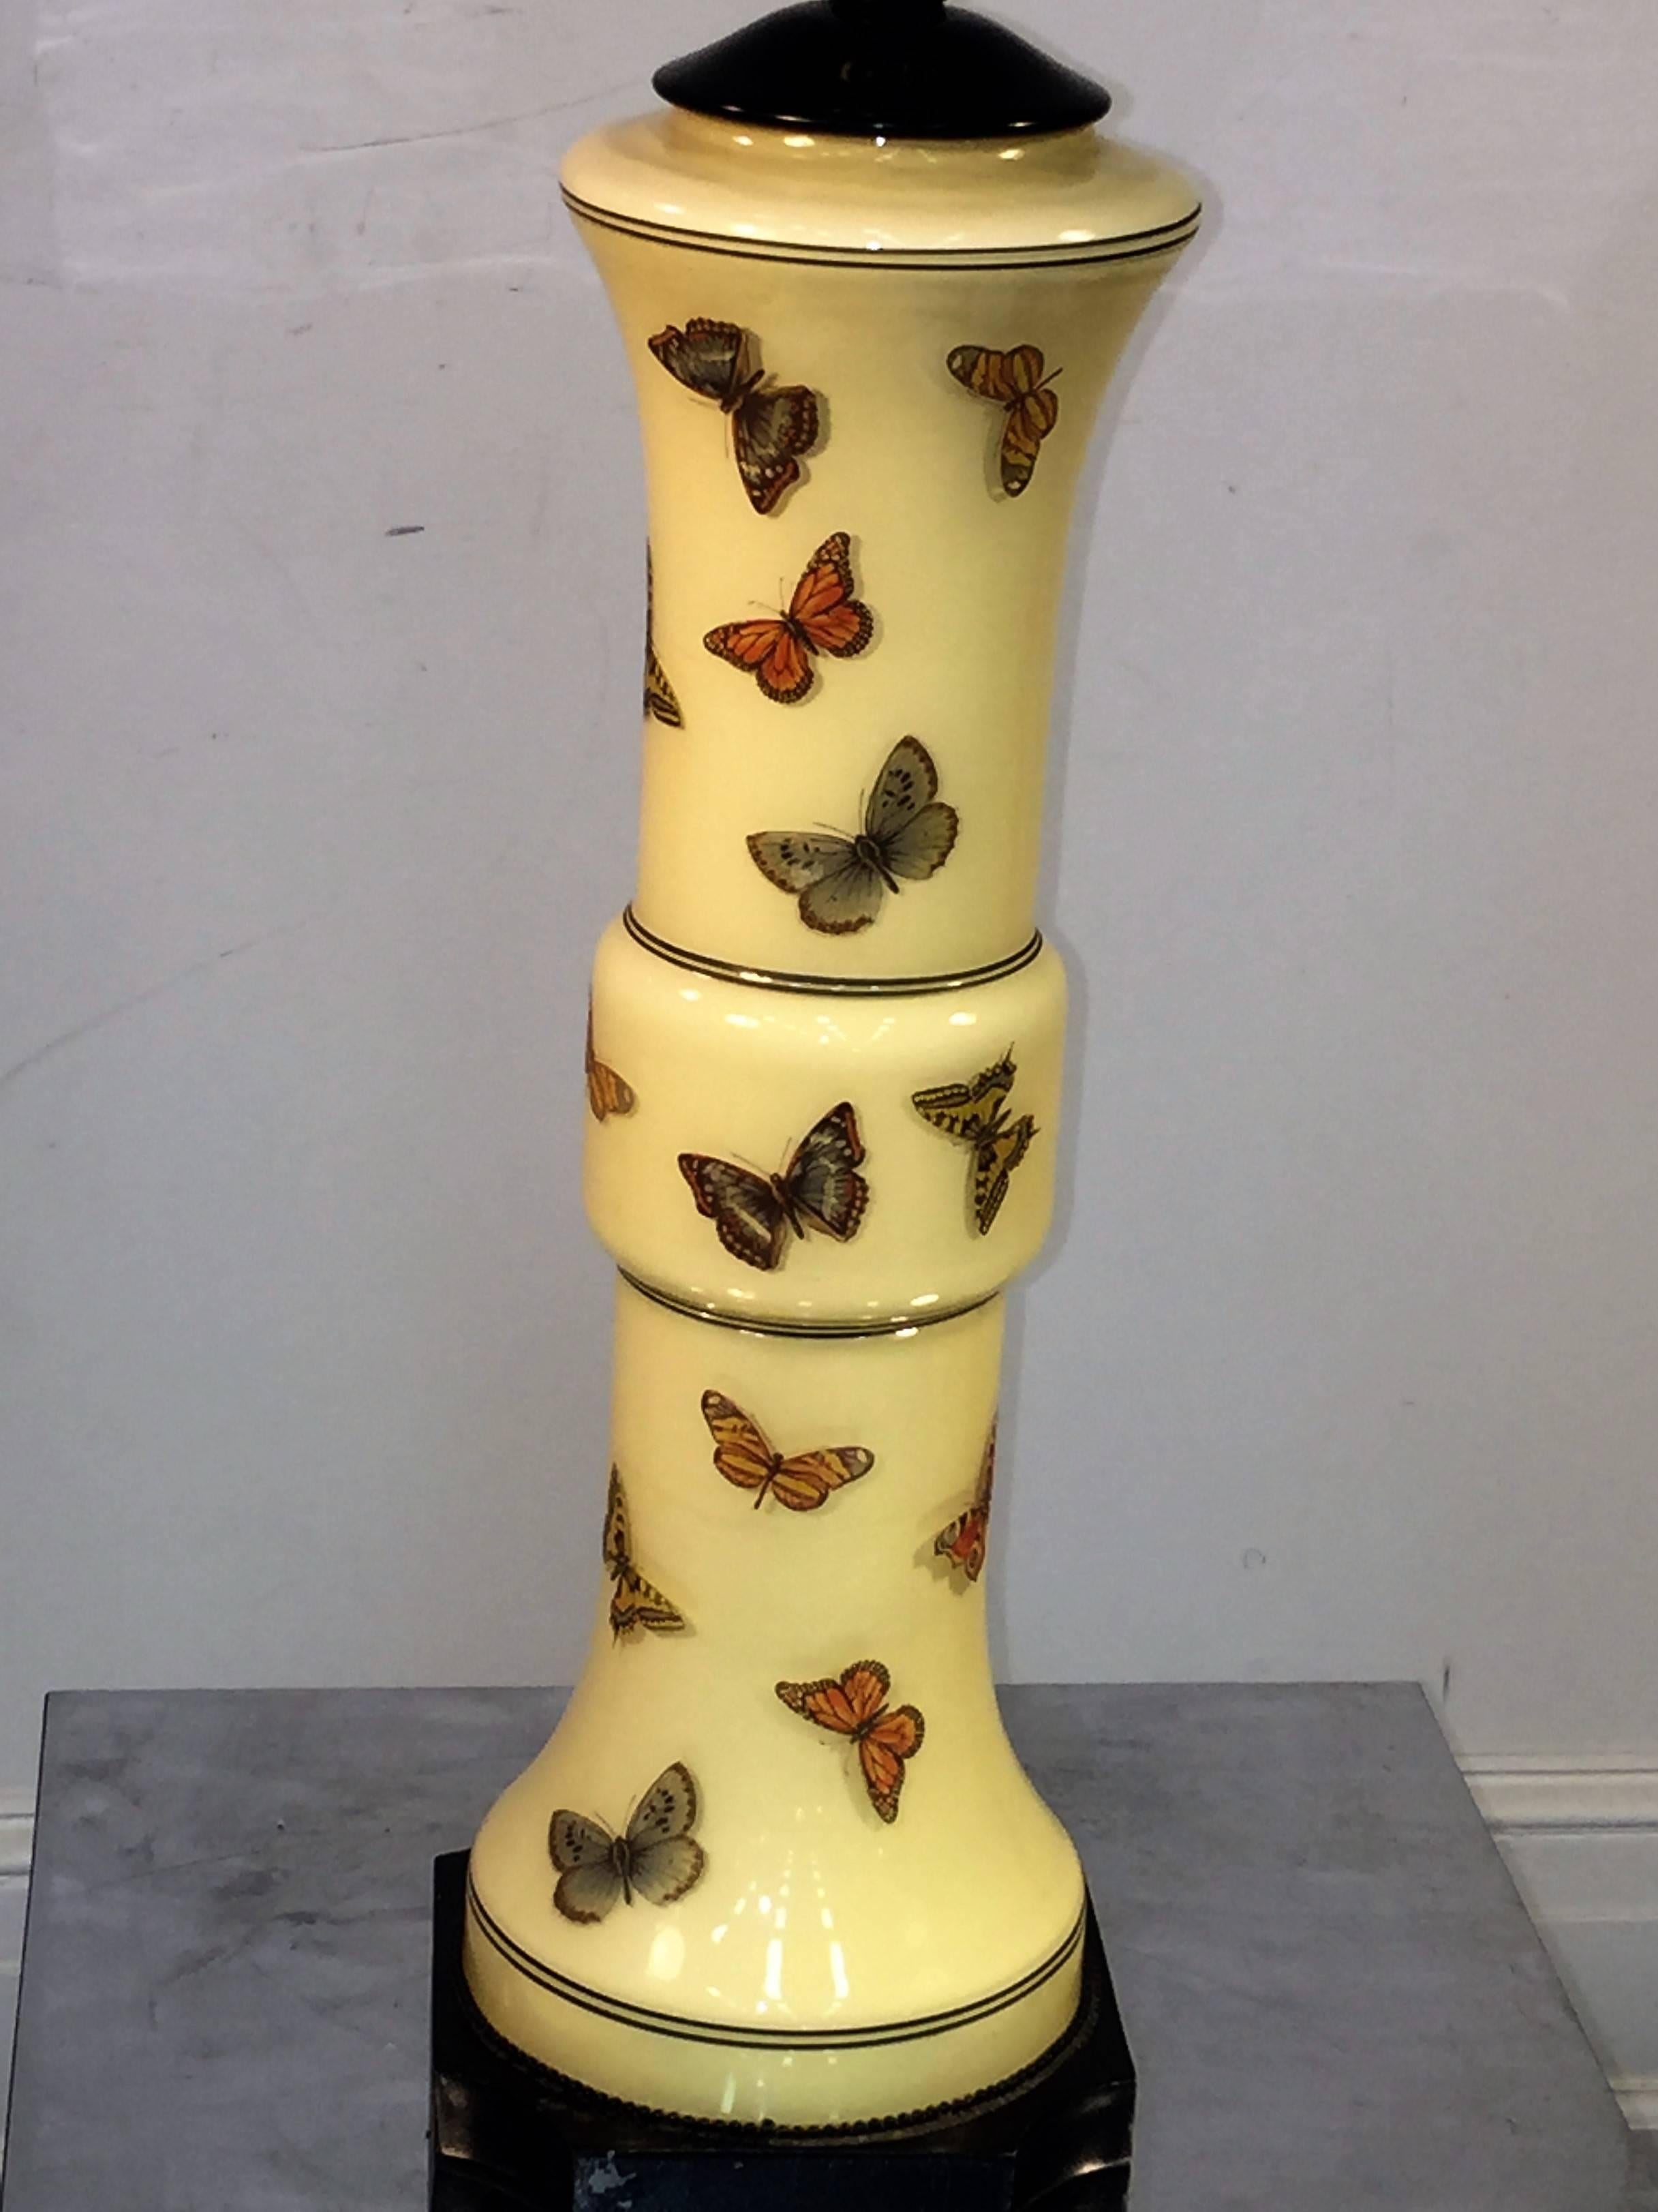 Pair of pale yellow glass lamps appliqued with colorful butterflies and black enameled line accents. Reminiscent of Piero Fornasetti's design. The height to the lamp fixture is 27